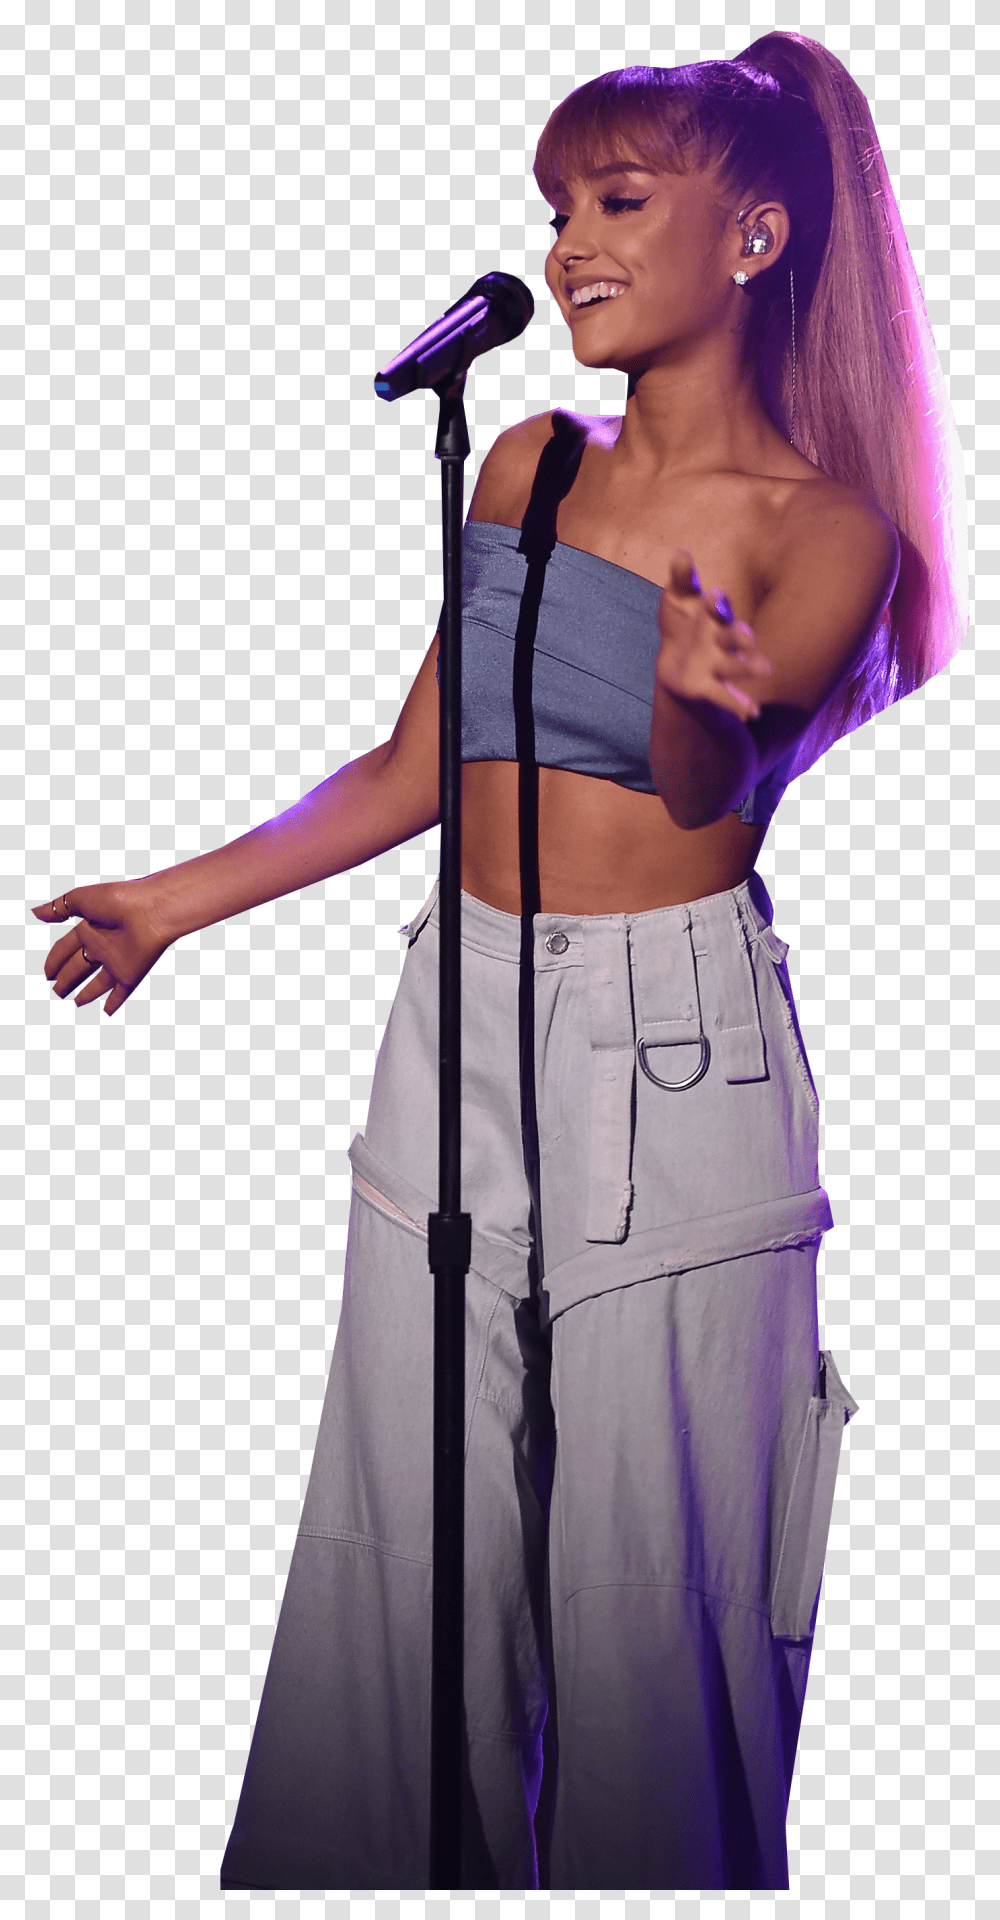 Ariana Grande On Stage Image Ariana Grande Singing, Person, Microphone, Evening Dress Transparent Png